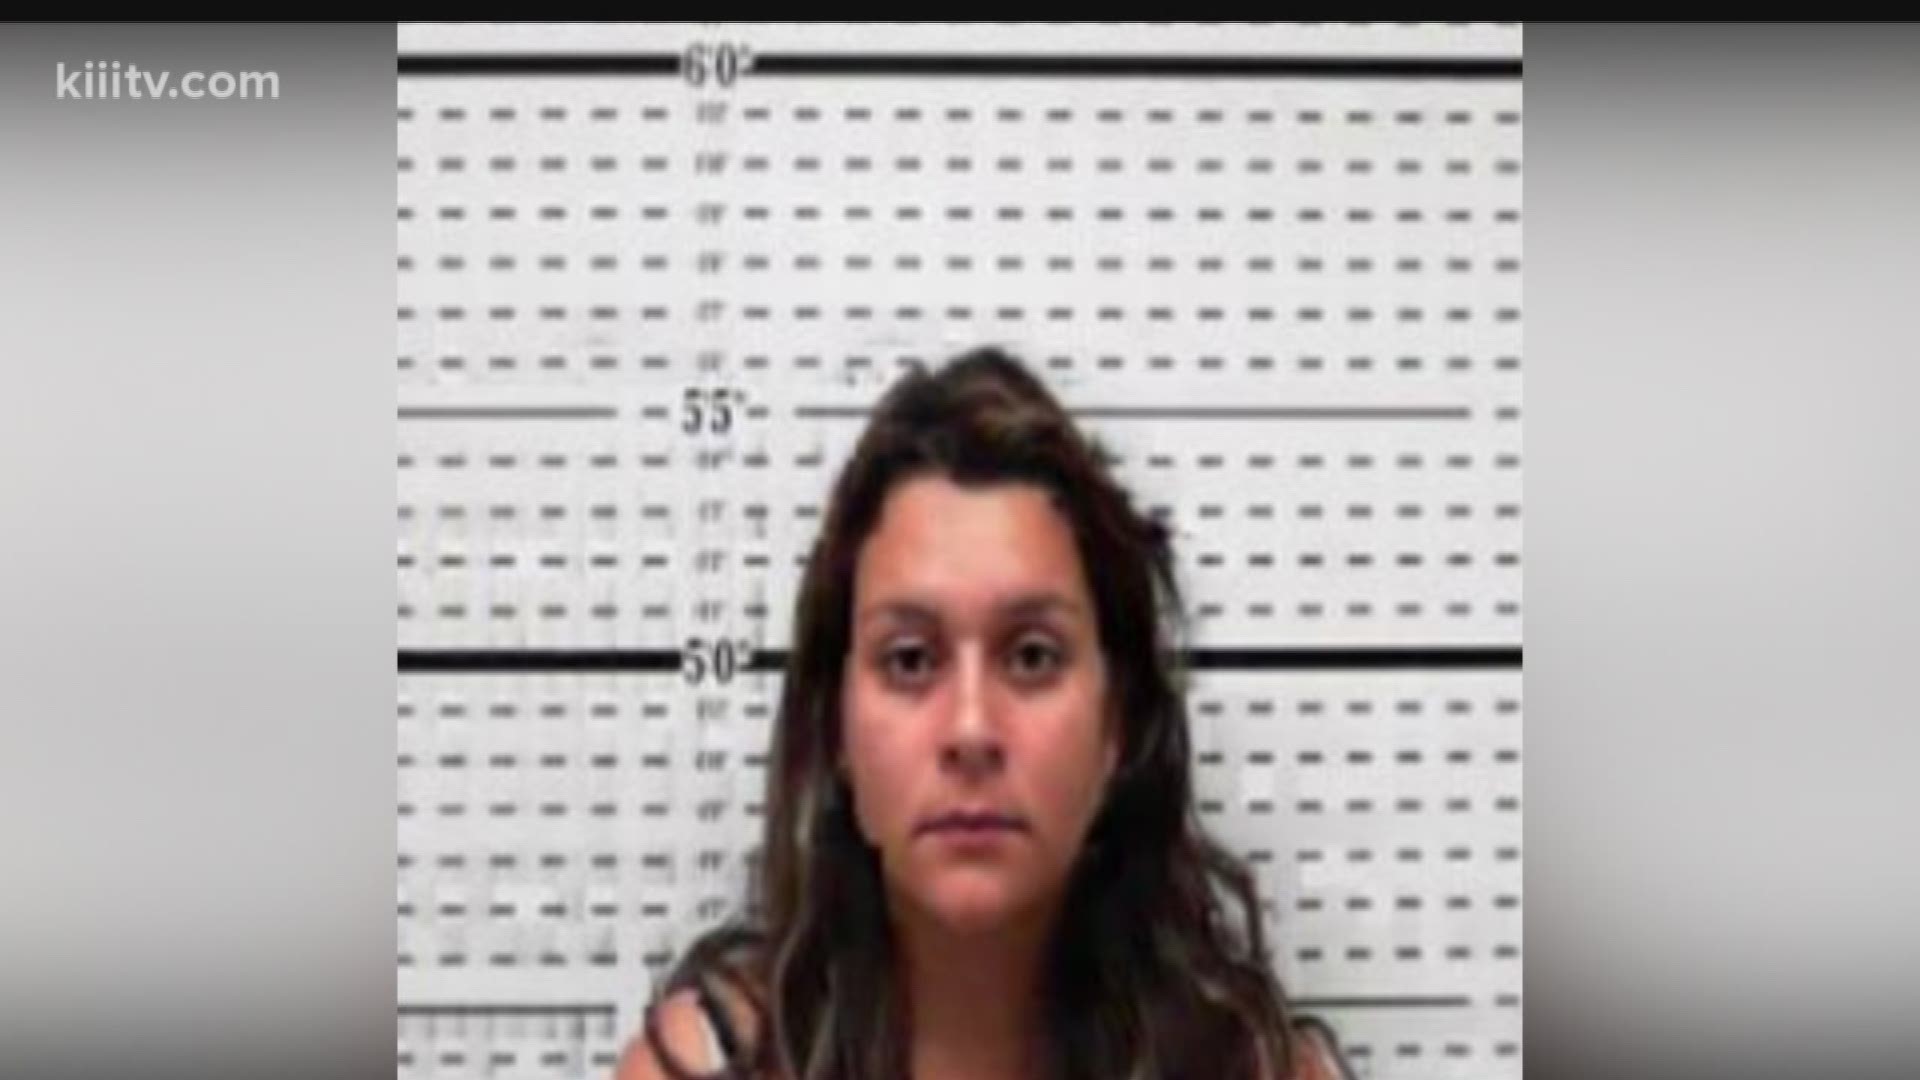 Pardo now faces charges of money laundering, and her child was turned over to a relative.